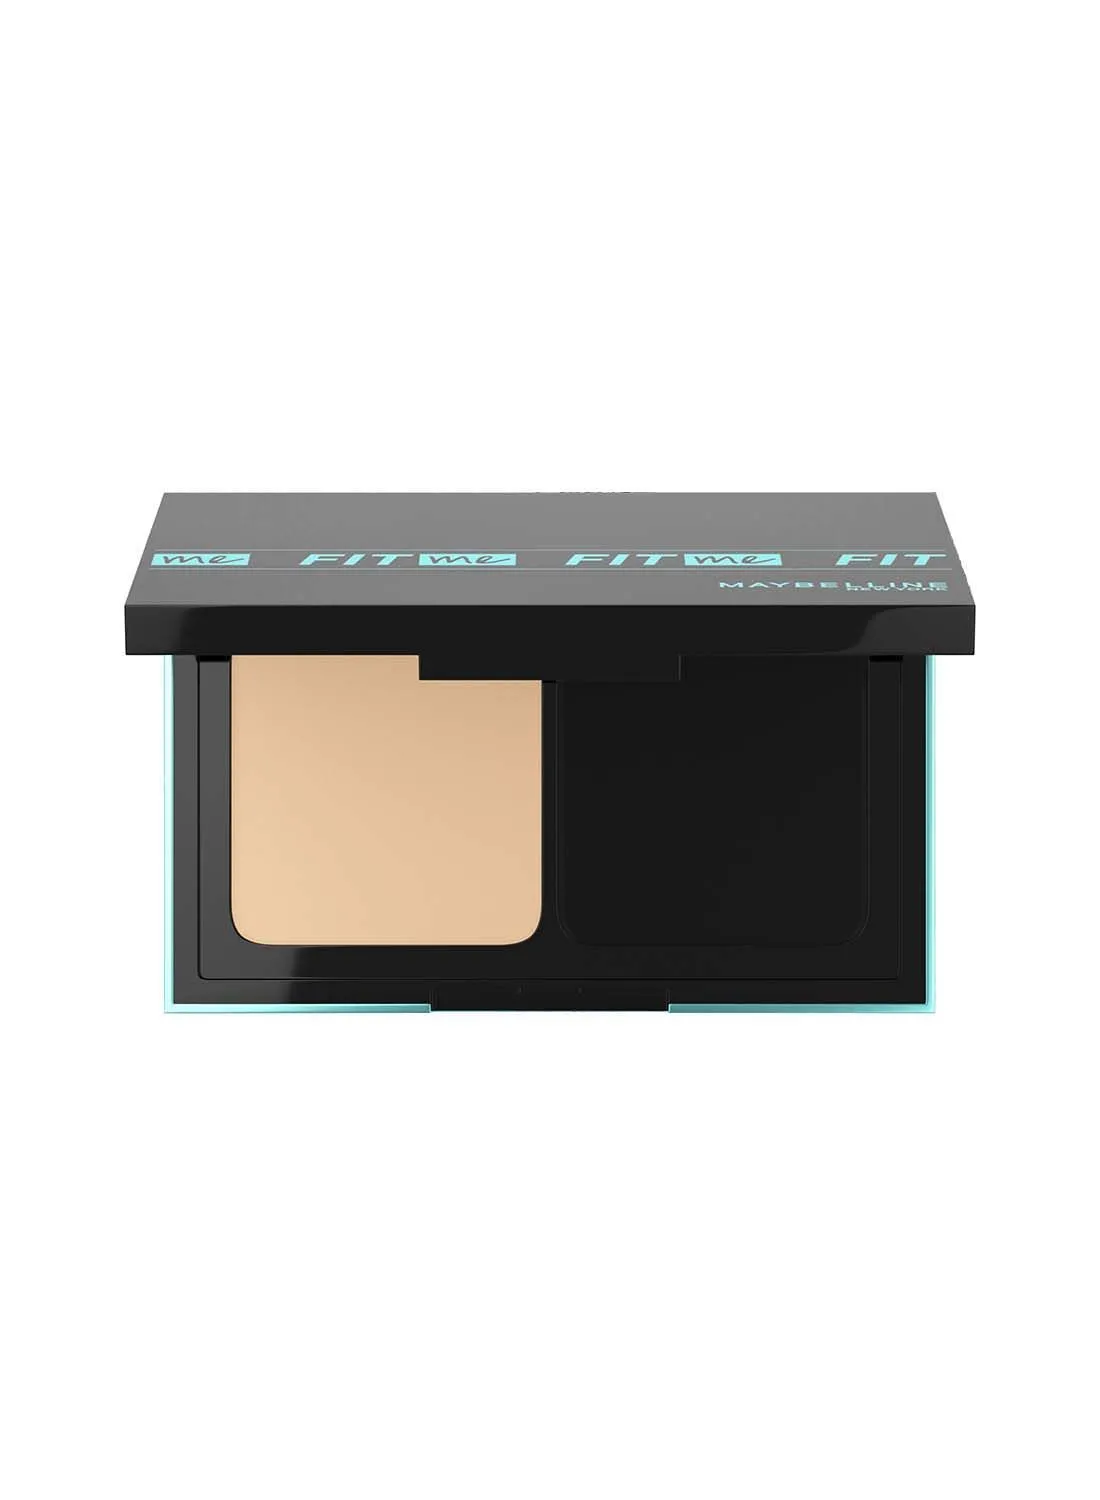 MAYBELLINE NEW YORK Maybelline New York, Fit Me foundation in a powder 220 Natural Beige